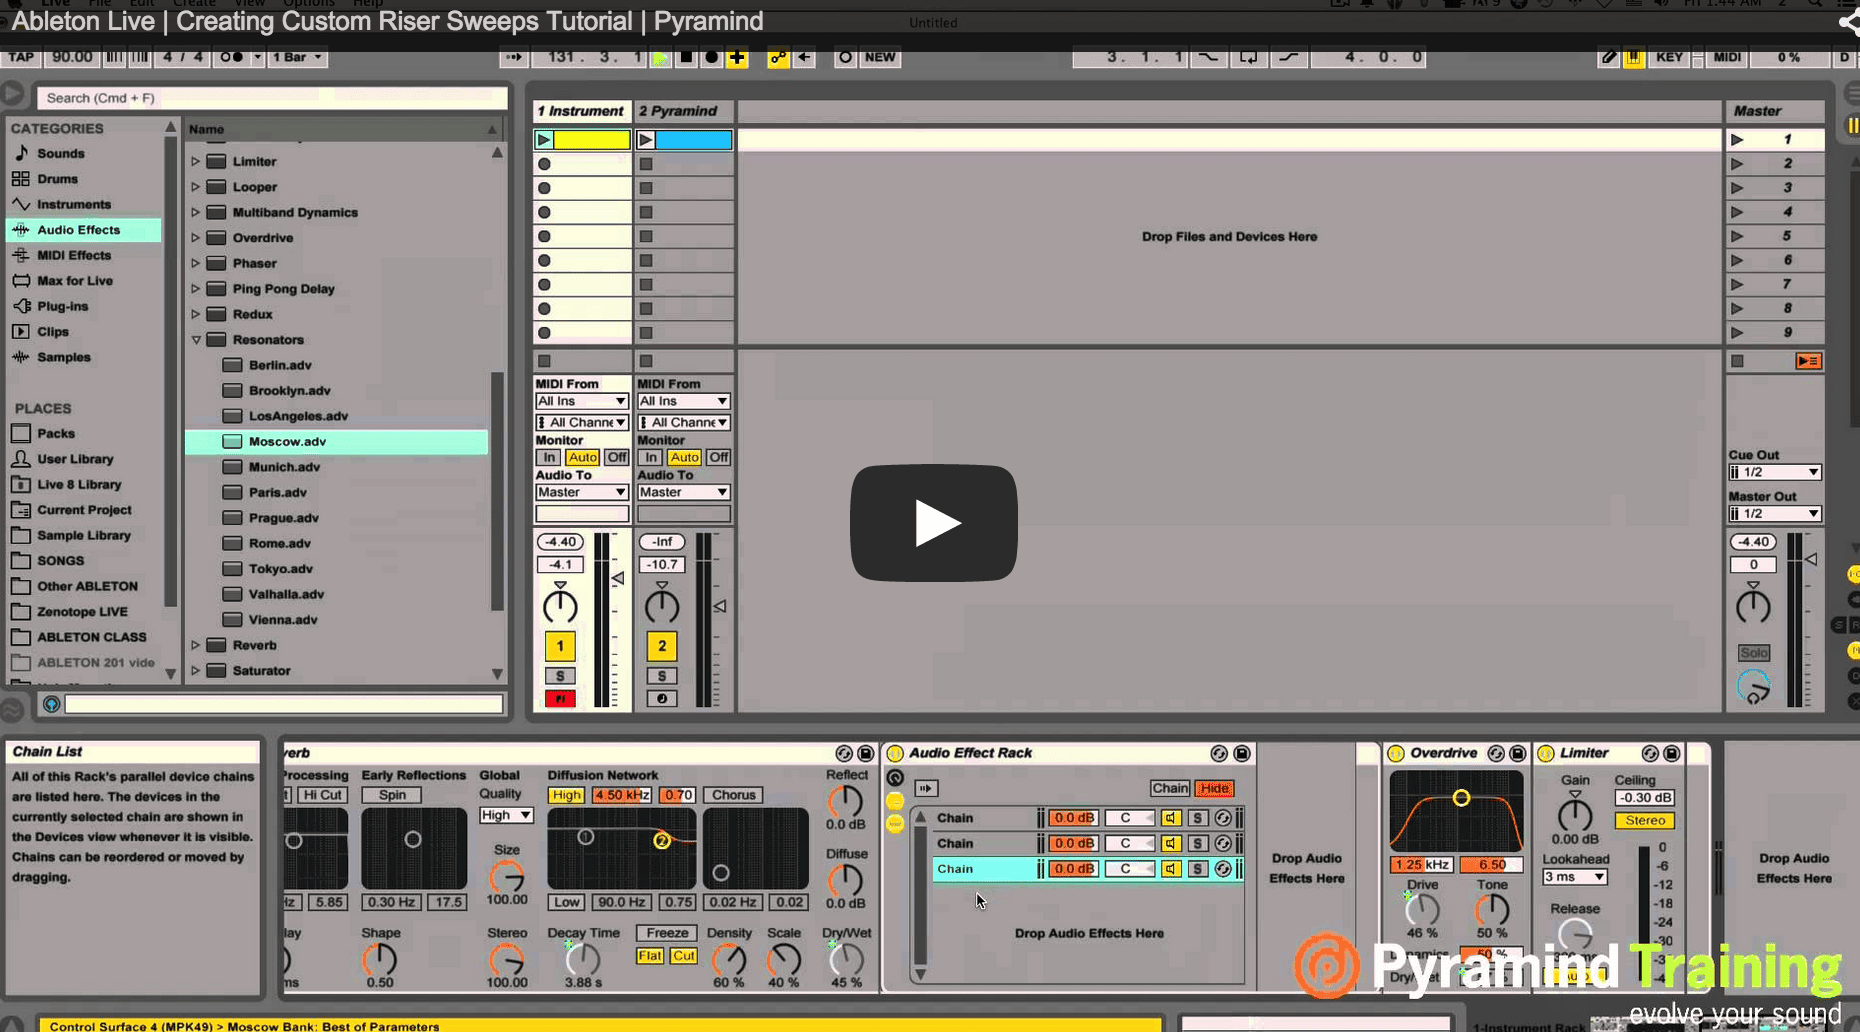 A screen shot of an Ableton Live screen showcasing music production and mixing tools.